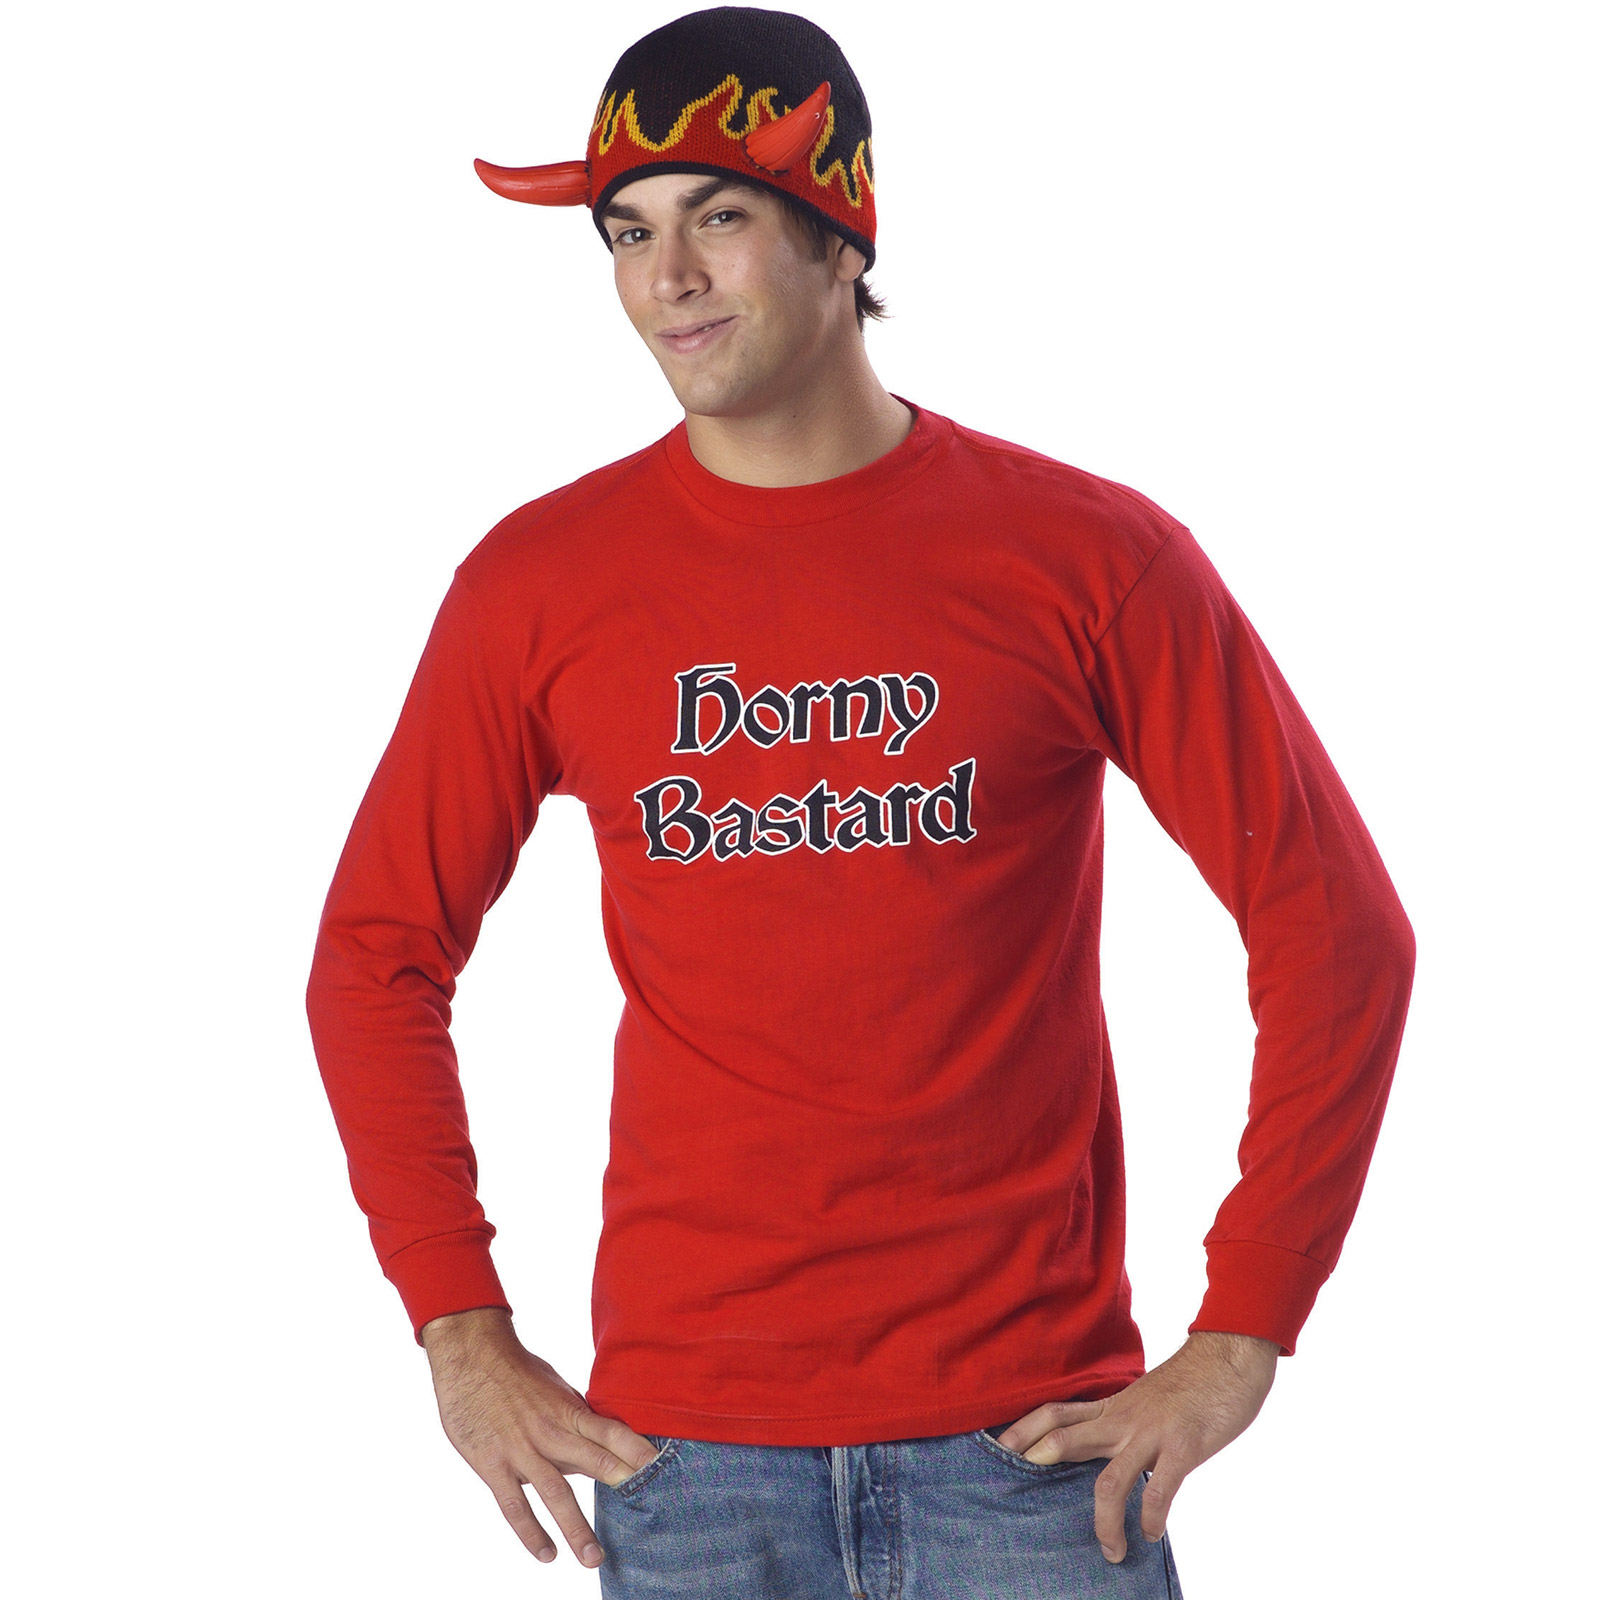 California Costume Collection Men's Horny Bastard Adult - Large